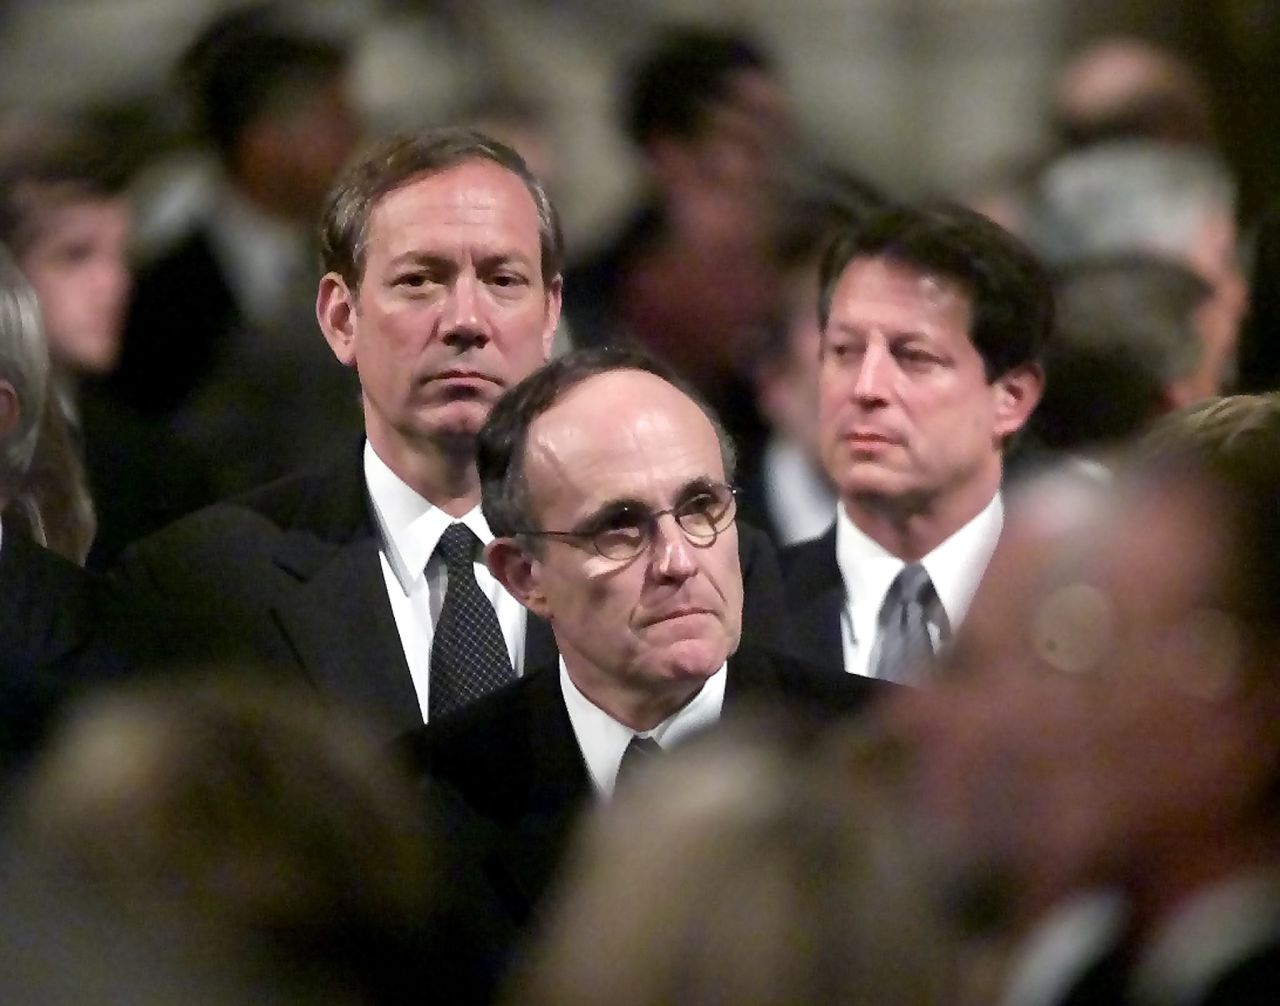 Pataki and his wife Libby currently reside in Garrison, New York. They have four children, Emily, Teddy, Allison and George Owen. In this photo, Pataki, left, then-New York City Mayor Rudy Giuliani, center, and then-U.S. Vice President Al Gore, right, watch the procession of religious leaders walk into St. Patrick's Cathedral during the funeral for John Cardinal O'Connor May 8, 2000 in New York City.